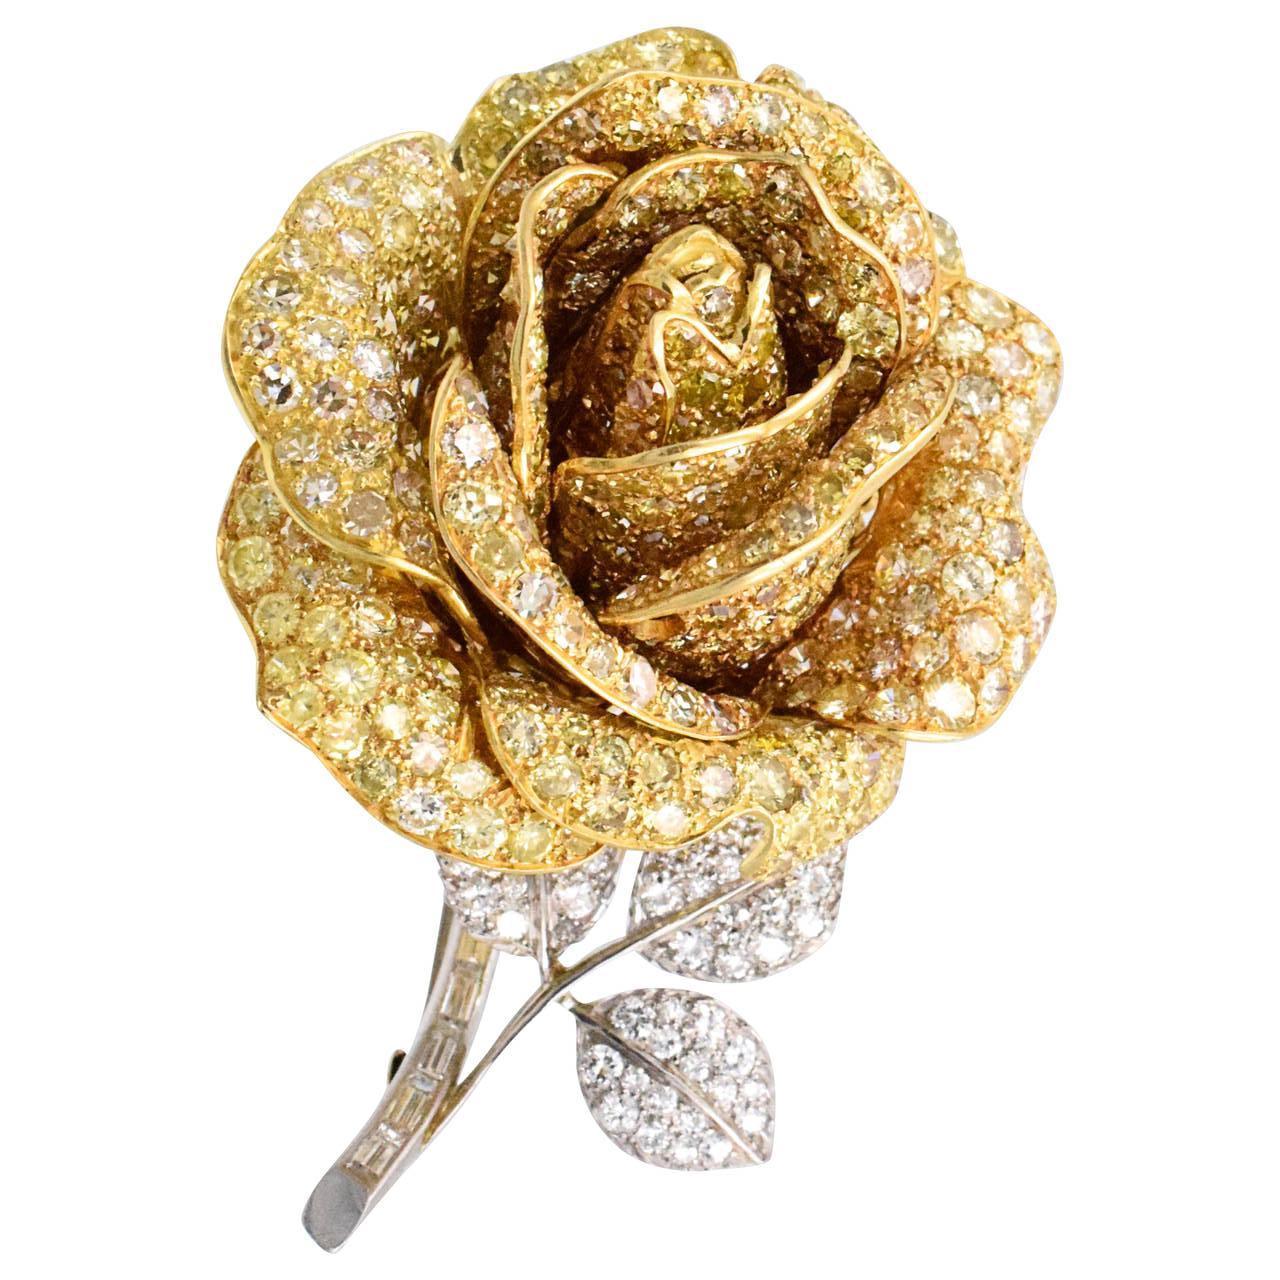 Impressive yellow diamond rose brooch!
Rose petals are in yellow gold encrusted with yellow diamonds, the stem and leaves are in platinum encrusted with brilliant and rectangular diamonds. Estimated diamond weight is 30 carats.
Measurements: 65mm x